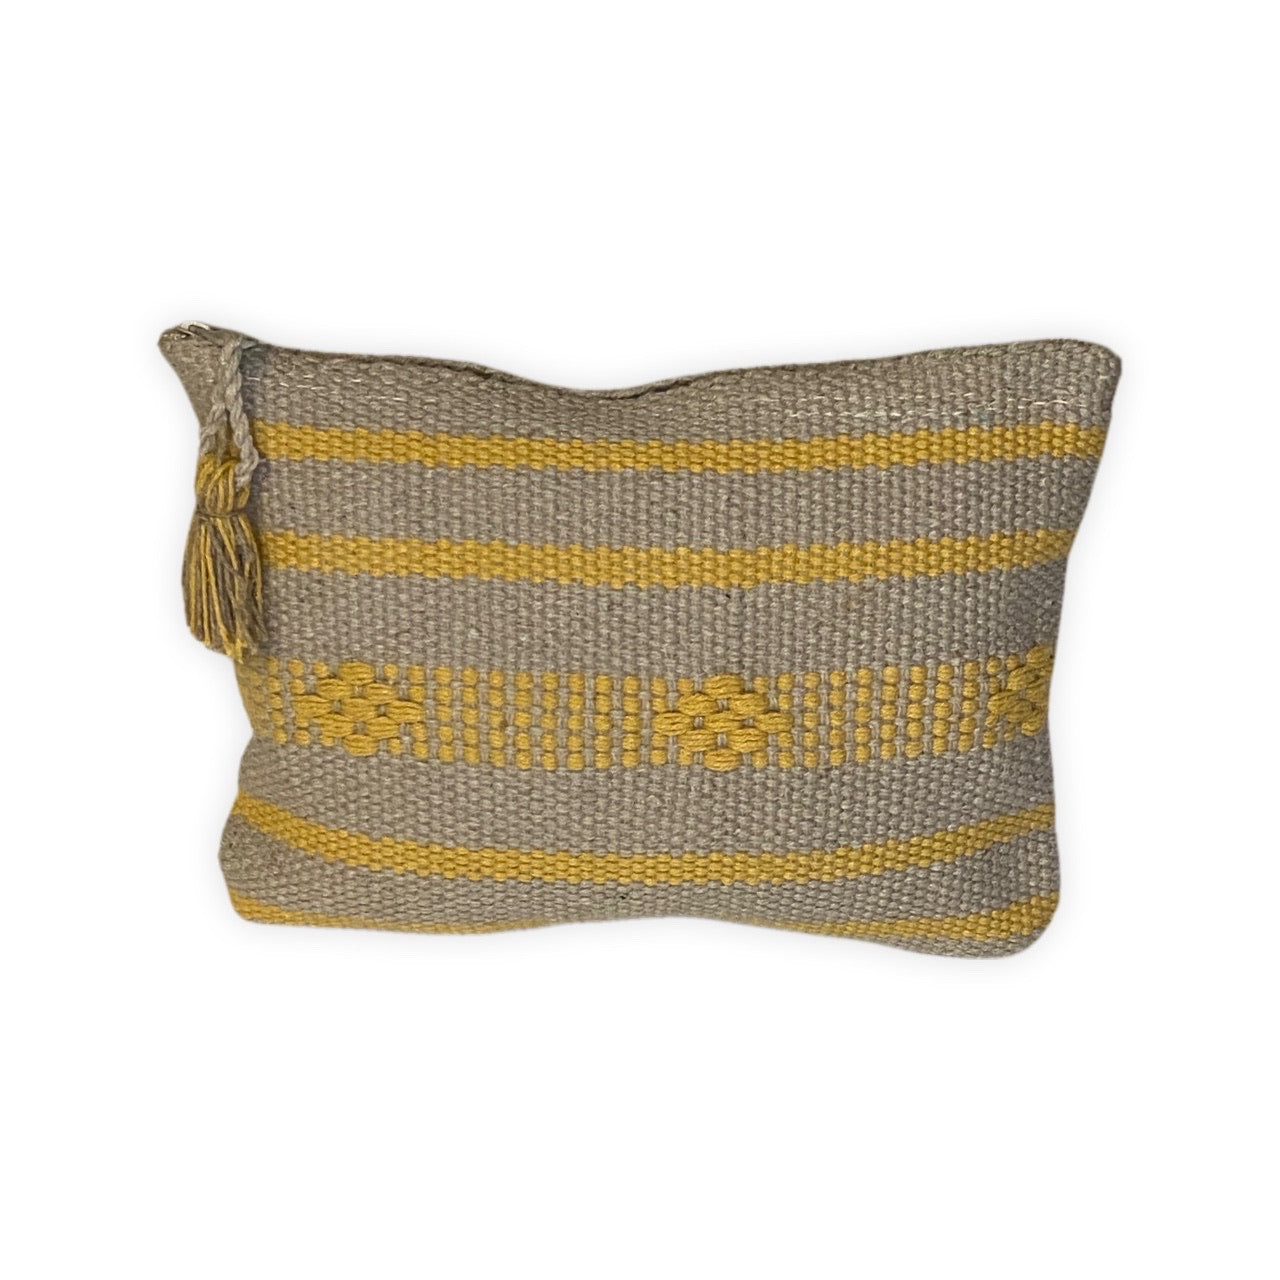 Handwoven grey and mustard yellow cotton pouch with traditional brocade patterns, featuring side tassel and crafted by Oaxacan artisan Alejandrina.